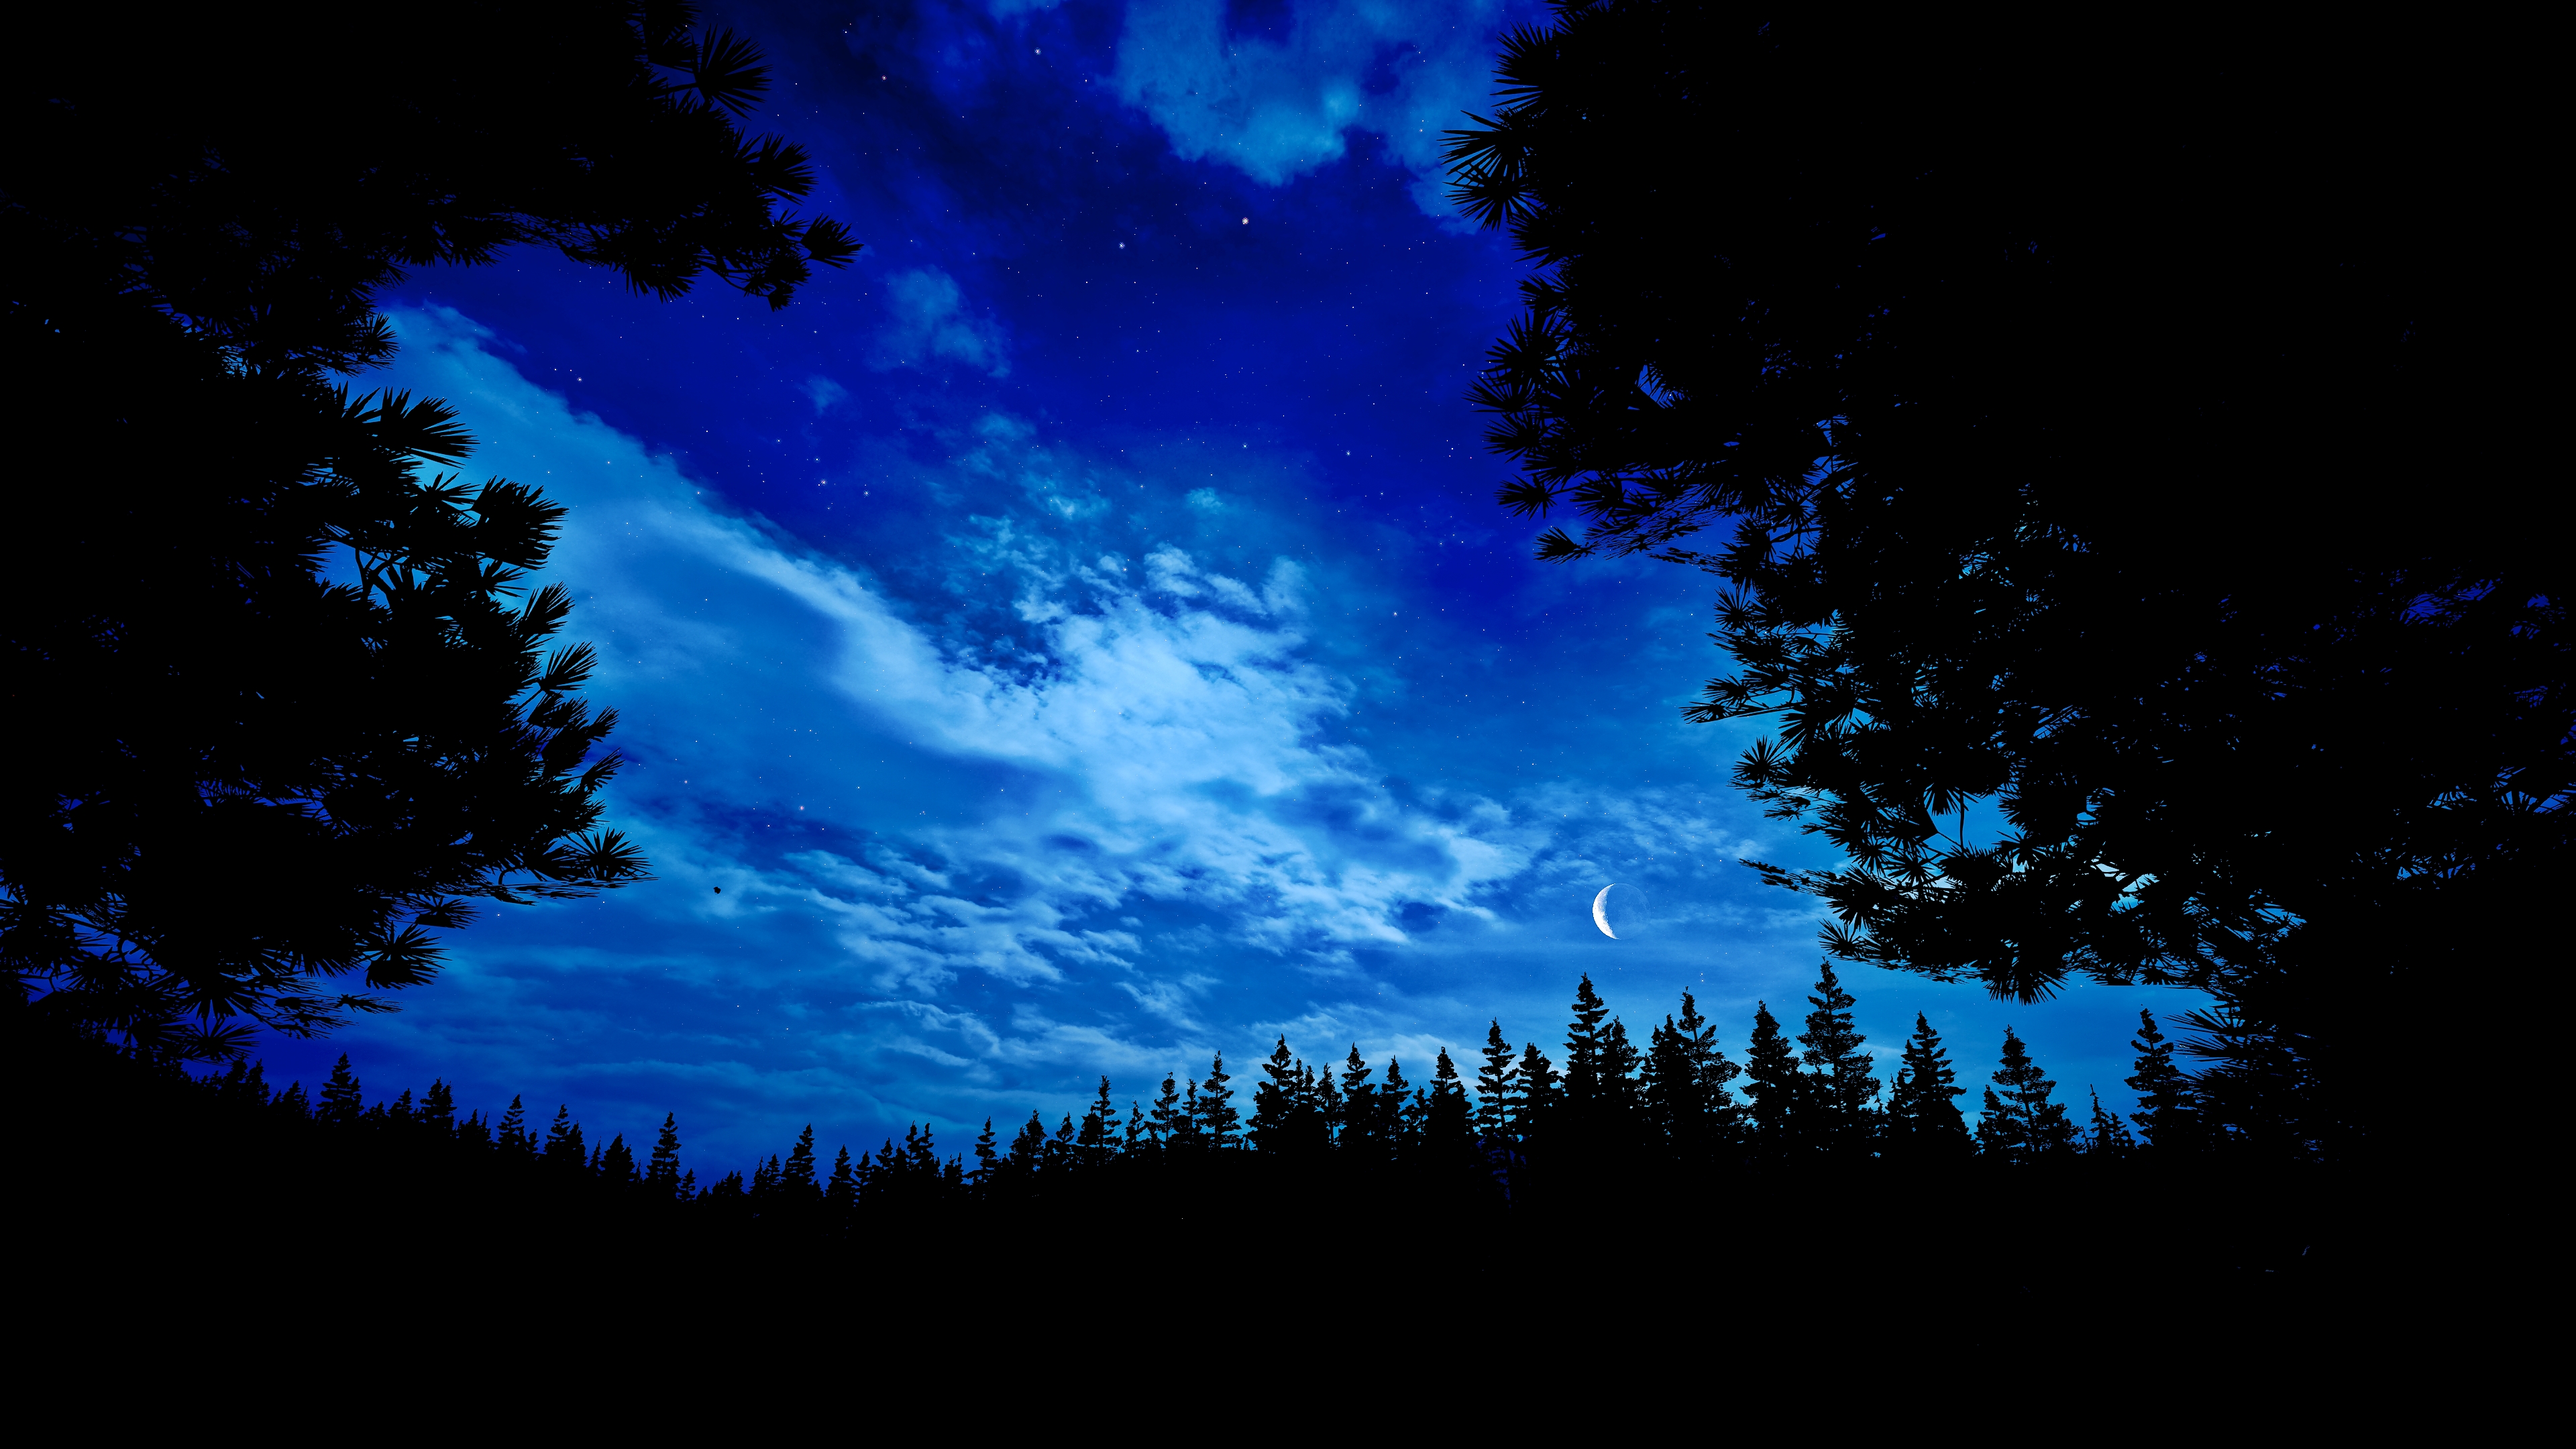 General 3840x2160 Far Cry 5 night full moon forest PC gaming